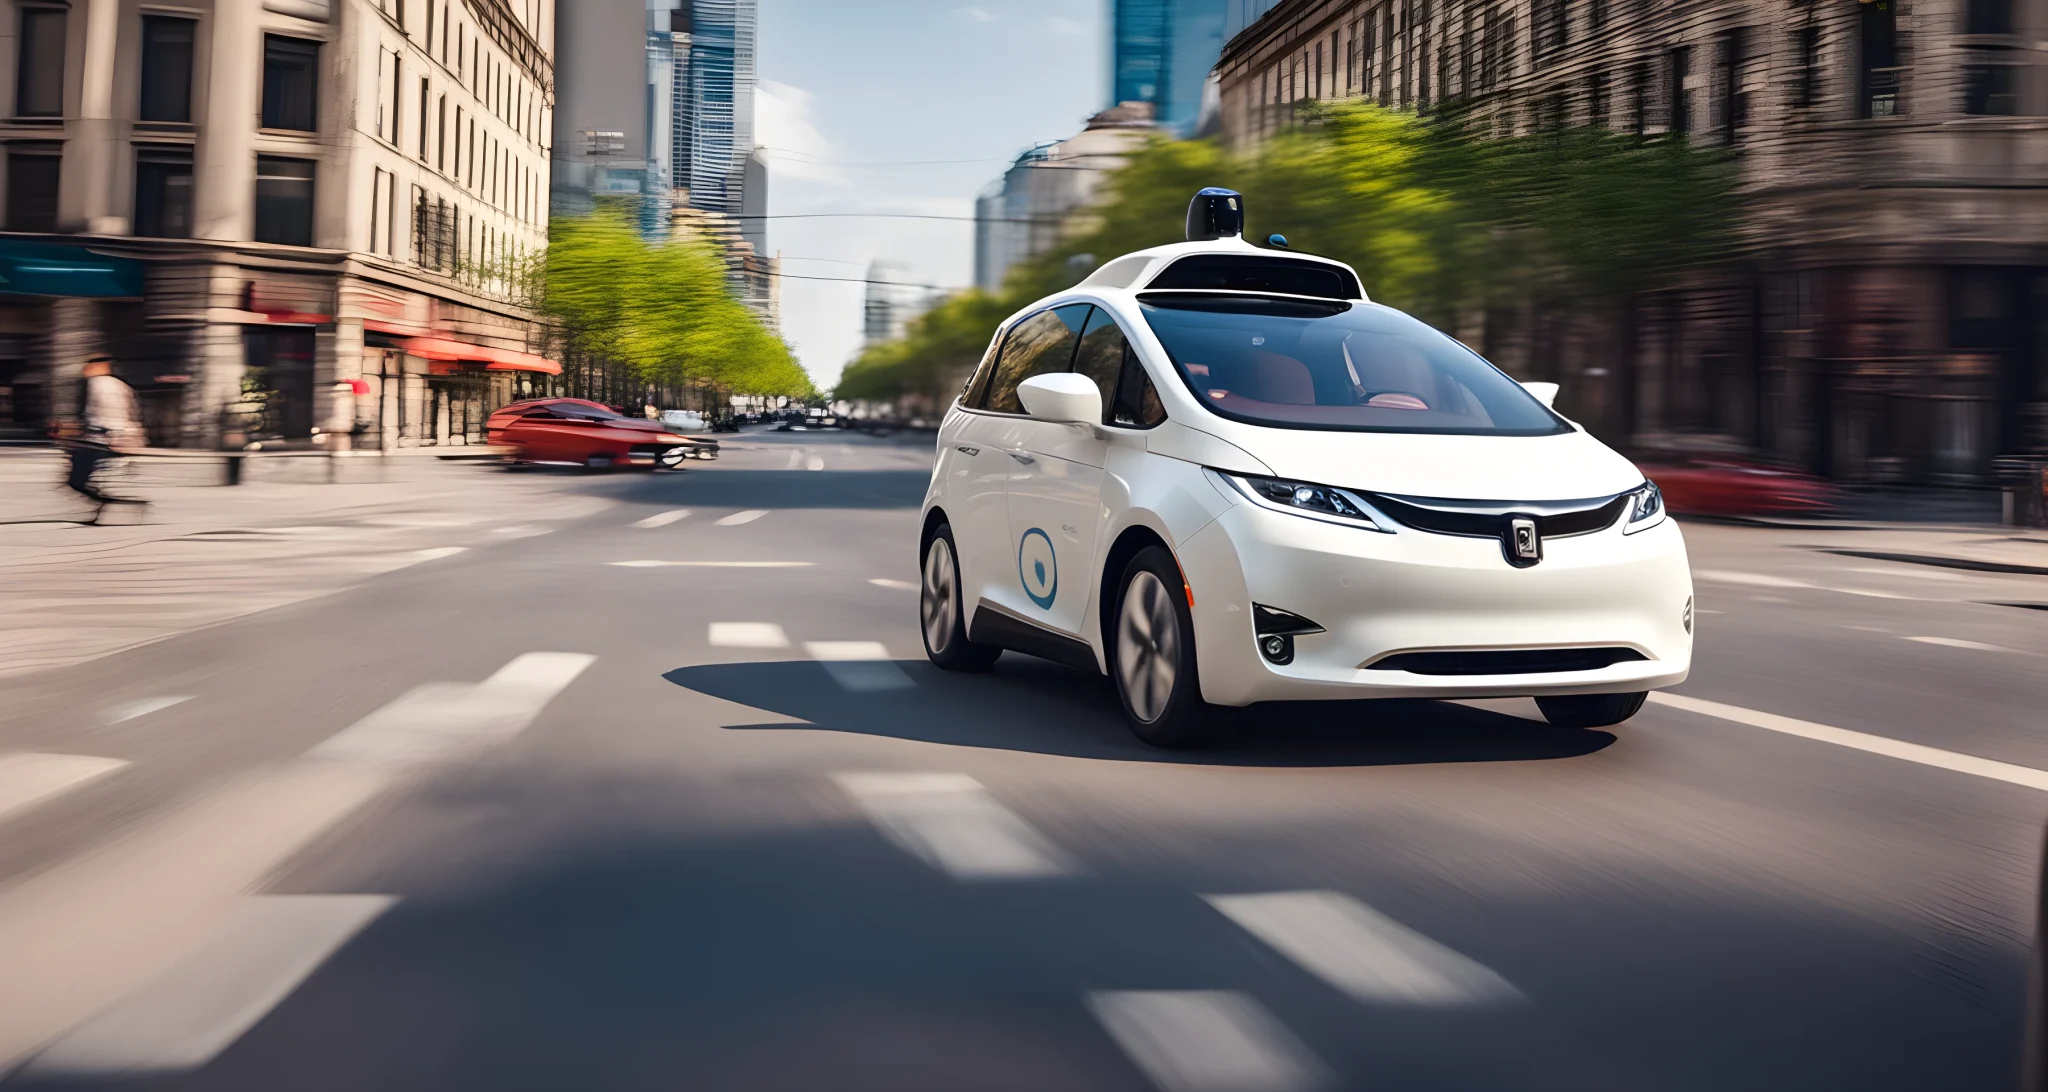 The image shows a self-driving car navigating through city streets with a human driver in the passenger seat.